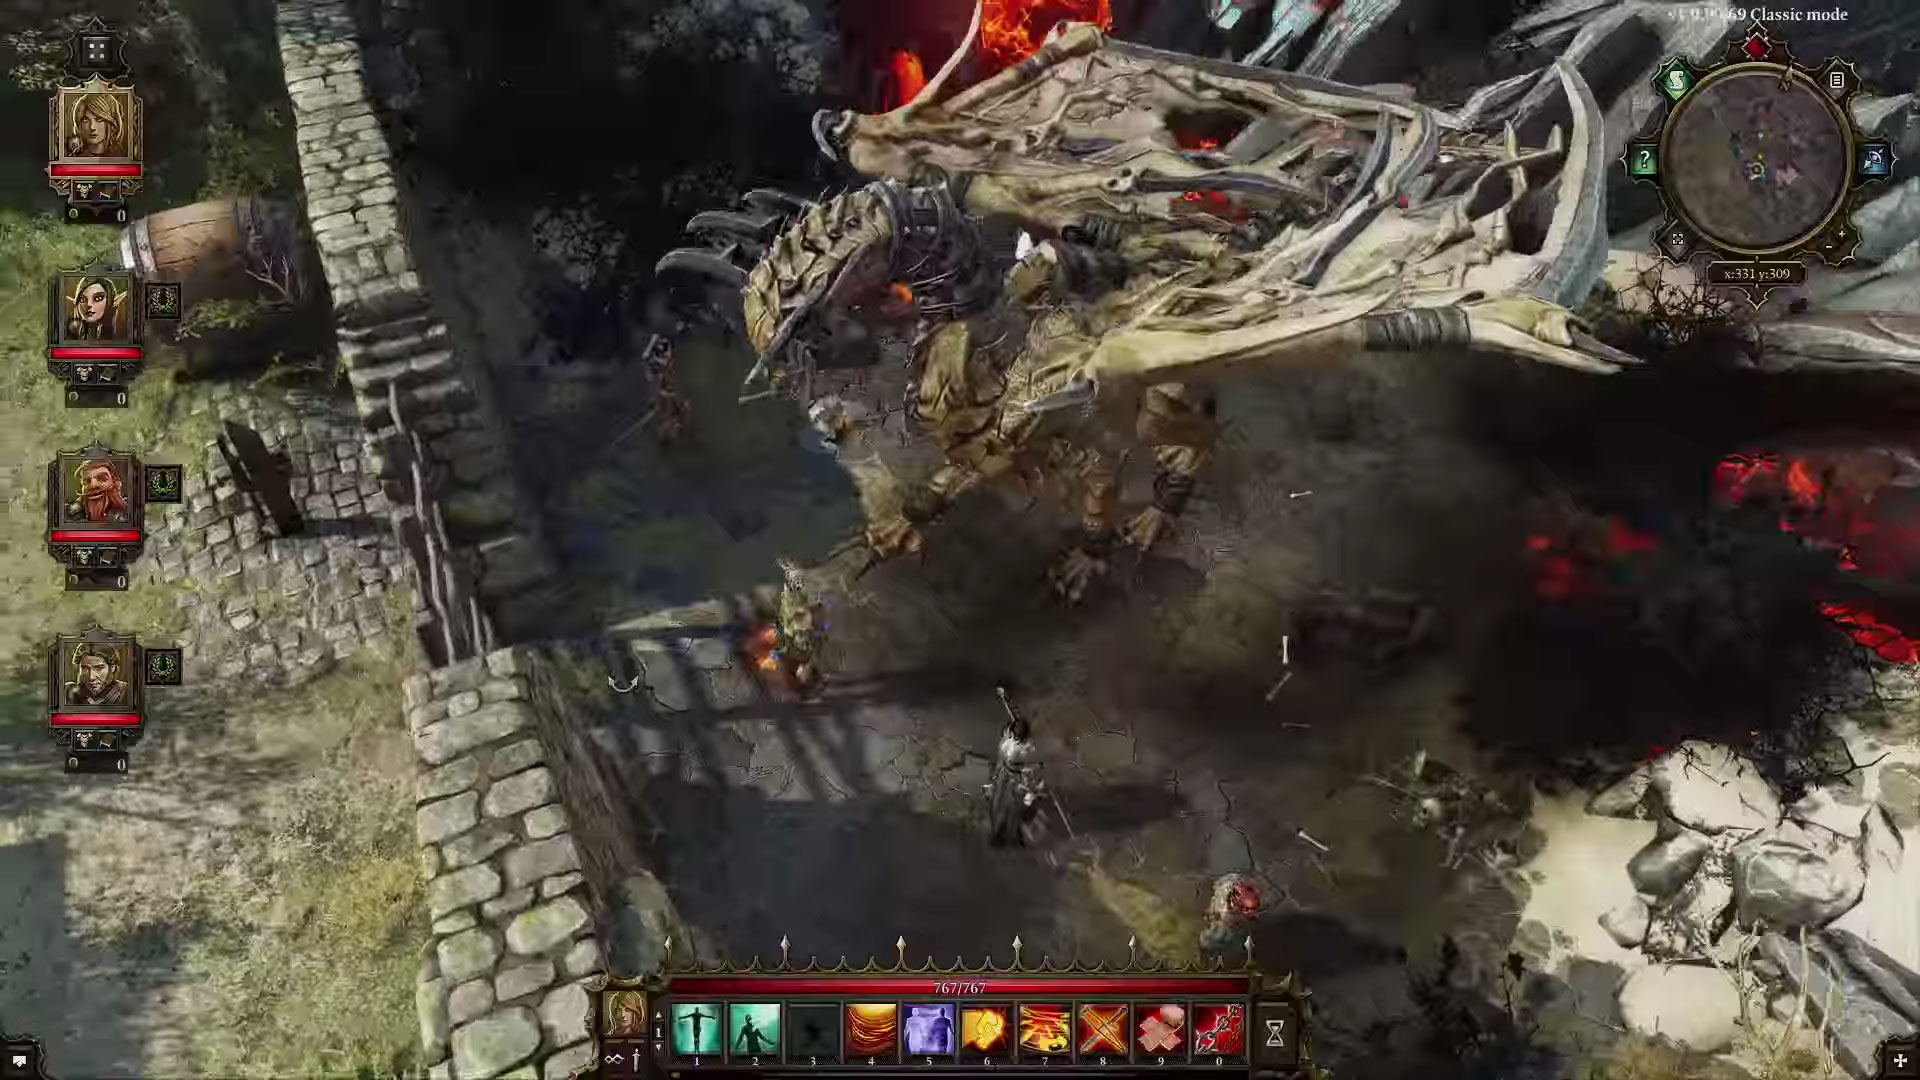 PC Game of the Year - Divinity: Original Sin - Best Games of 2014